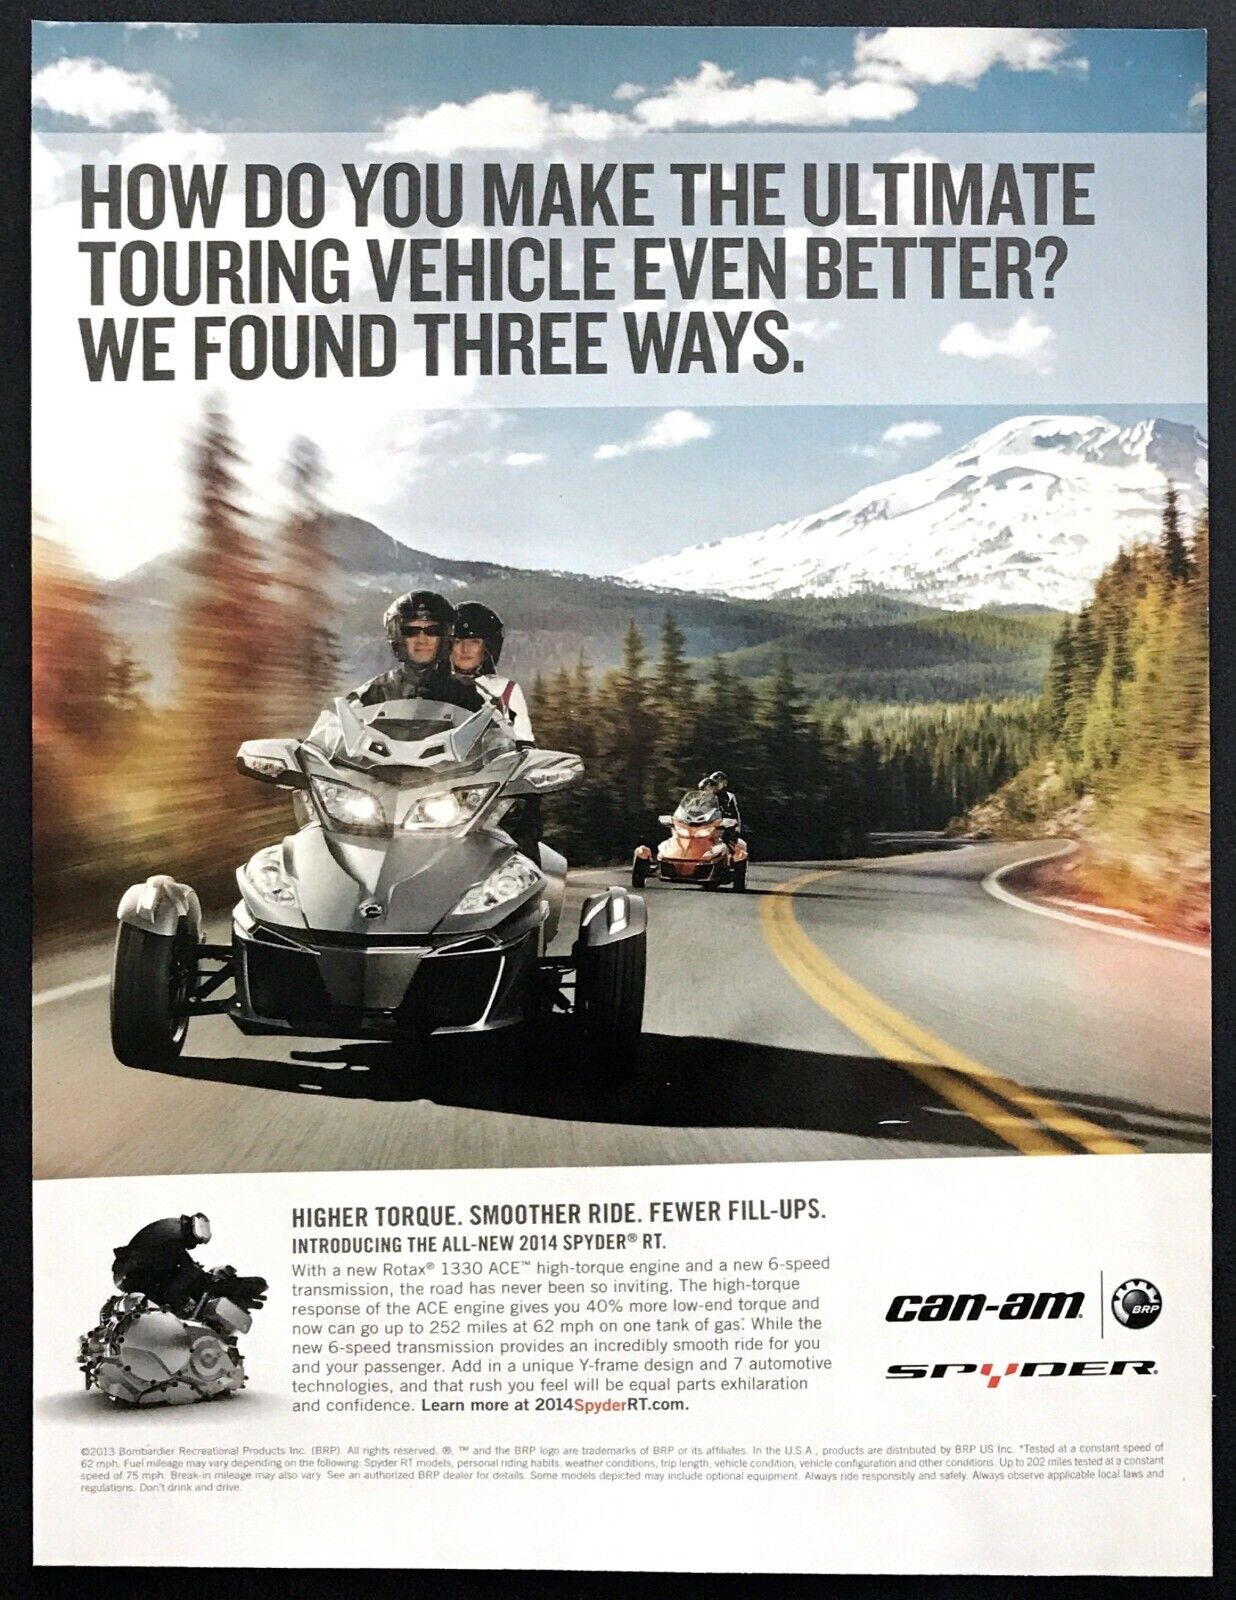 2014 Can-Am Spyder RT 3-Wheel Motorcycle photo Ultimate Touring Vehicle print ad